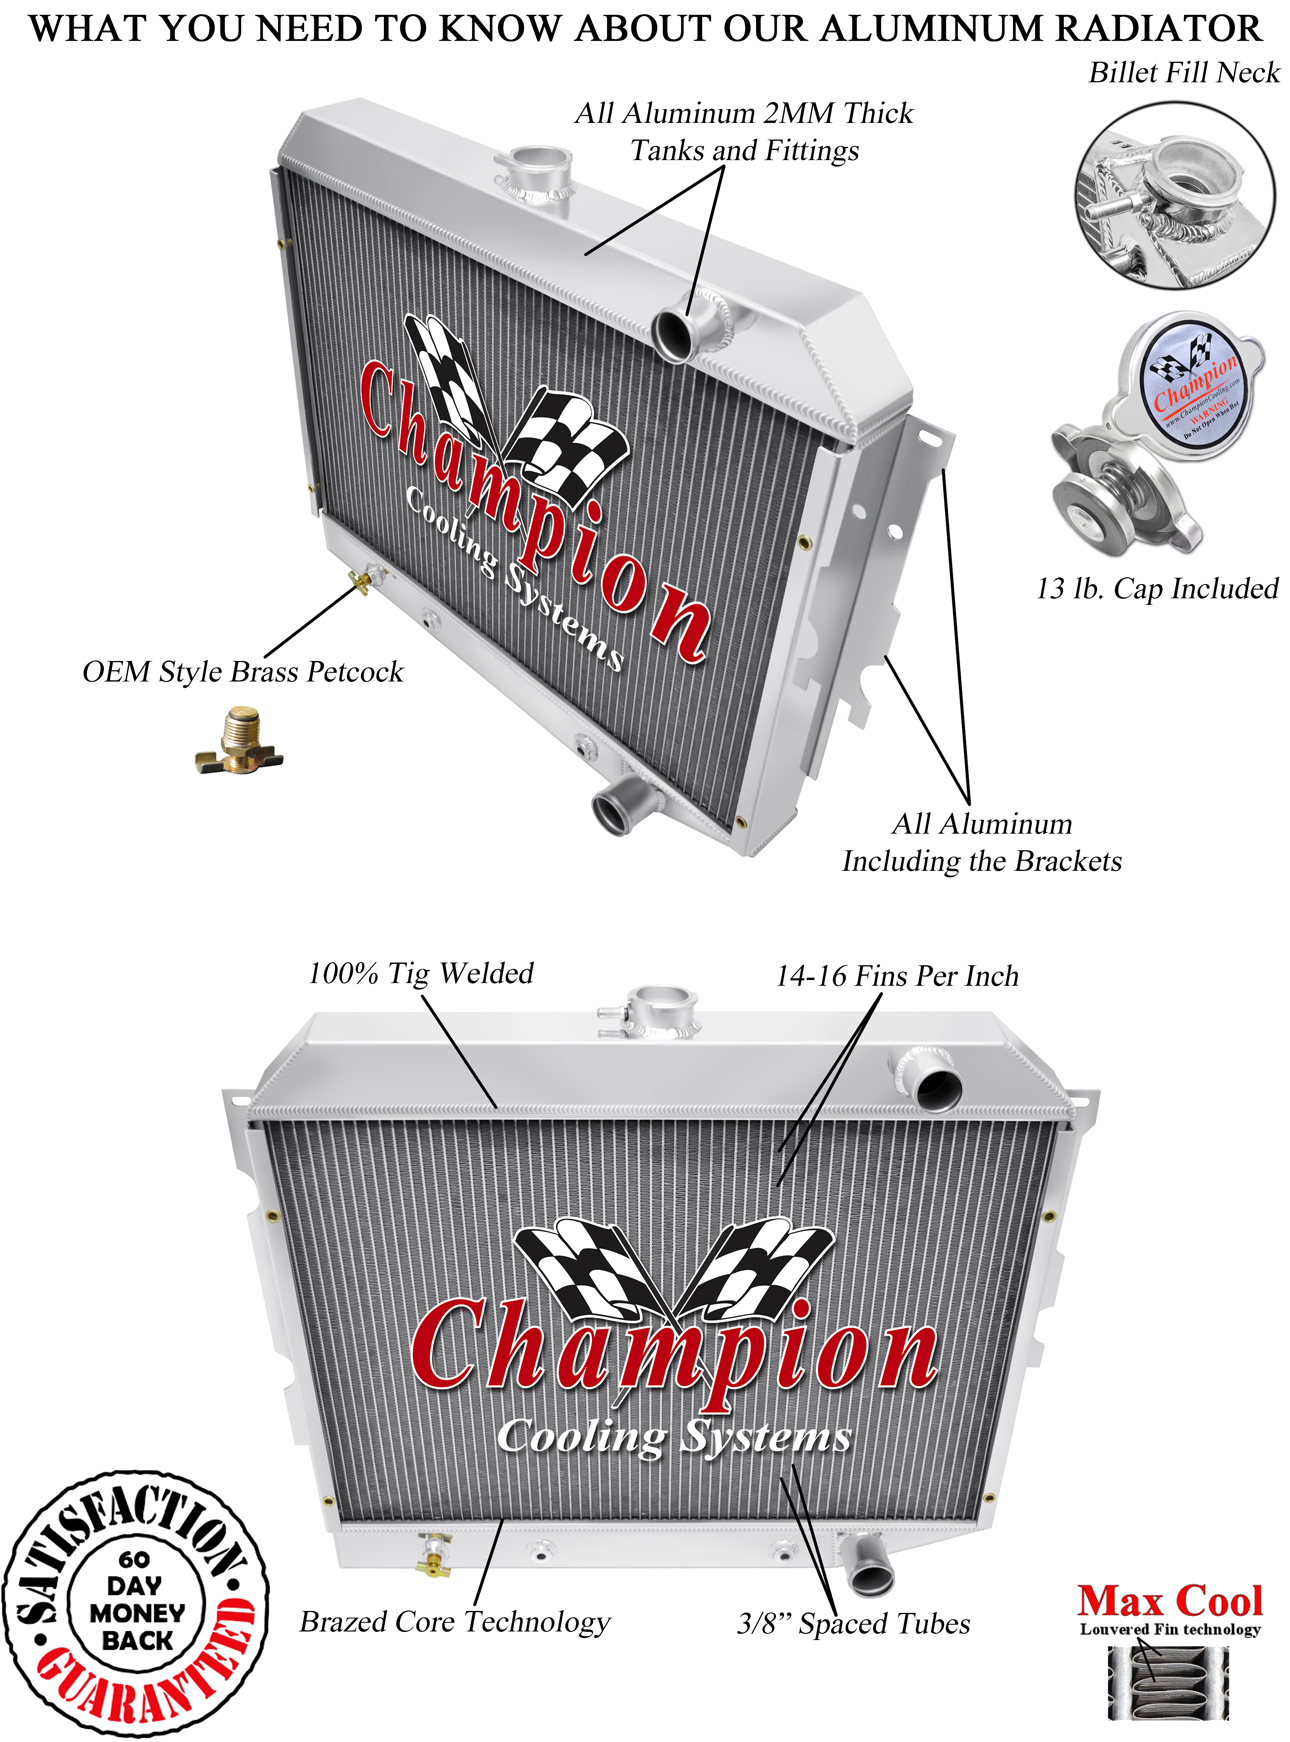 https://www.championcooling.com/photos/Photos%20White/Without%20Fans/1643/1968-1974%206.1%20and%205.7%20Hemi%20Radiator.jpg